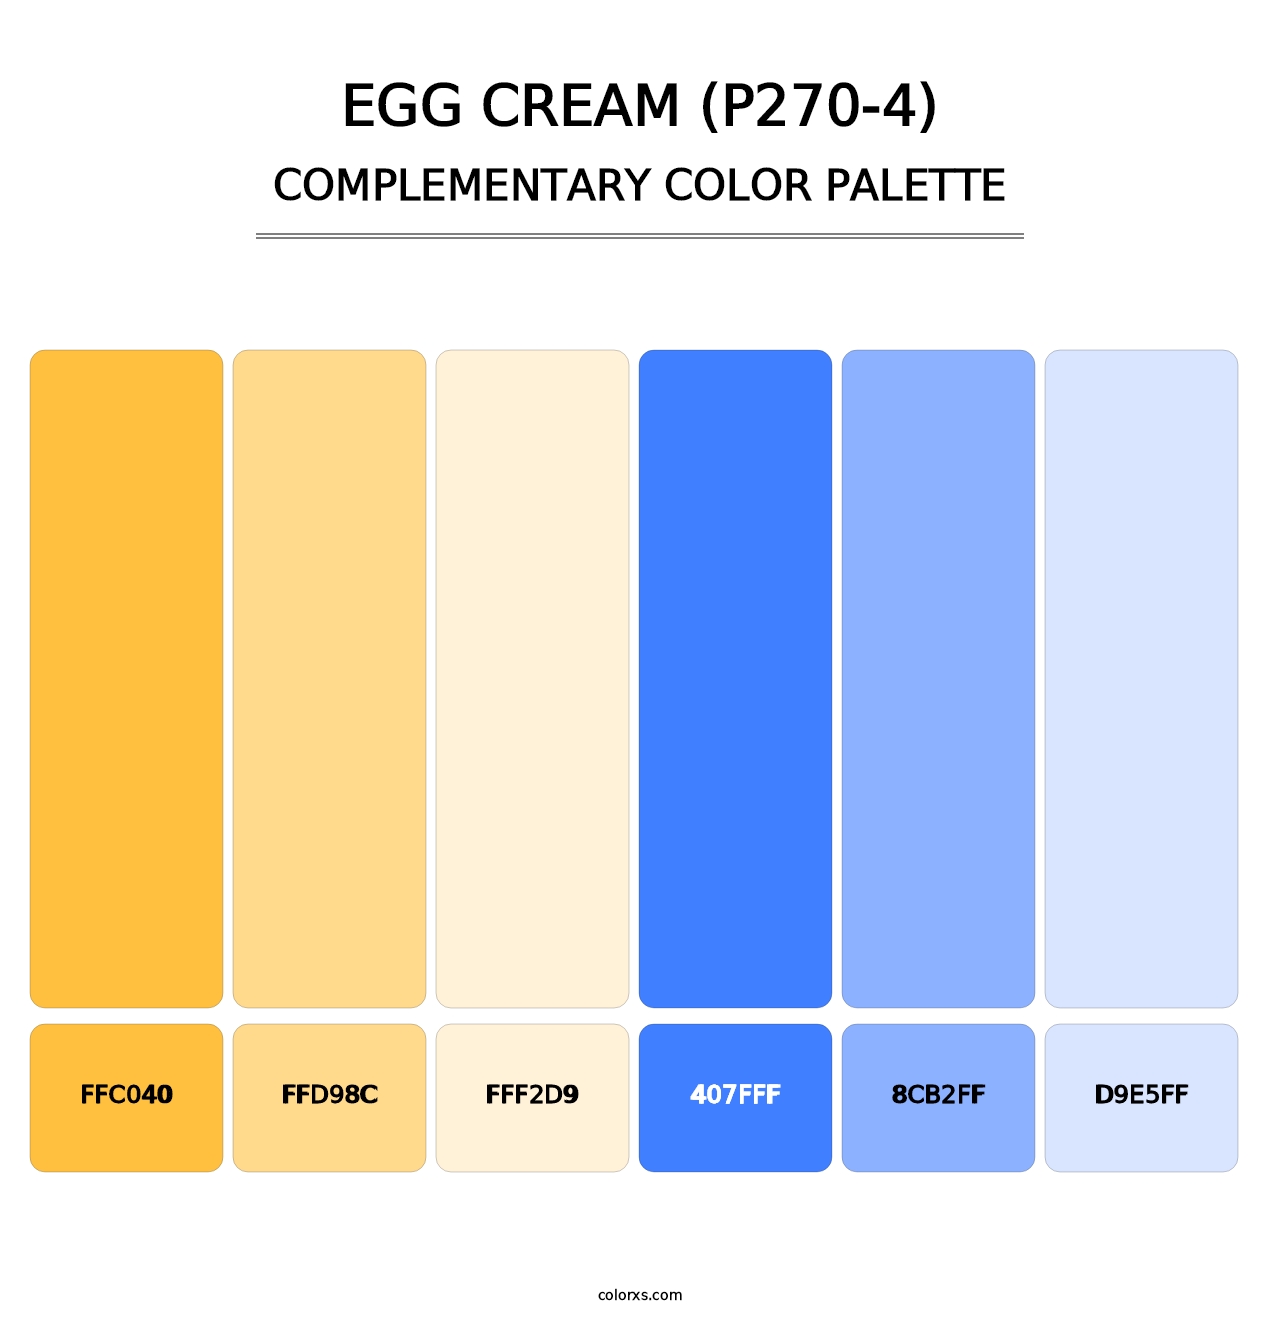 Egg Cream (P270-4) - Complementary Color Palette